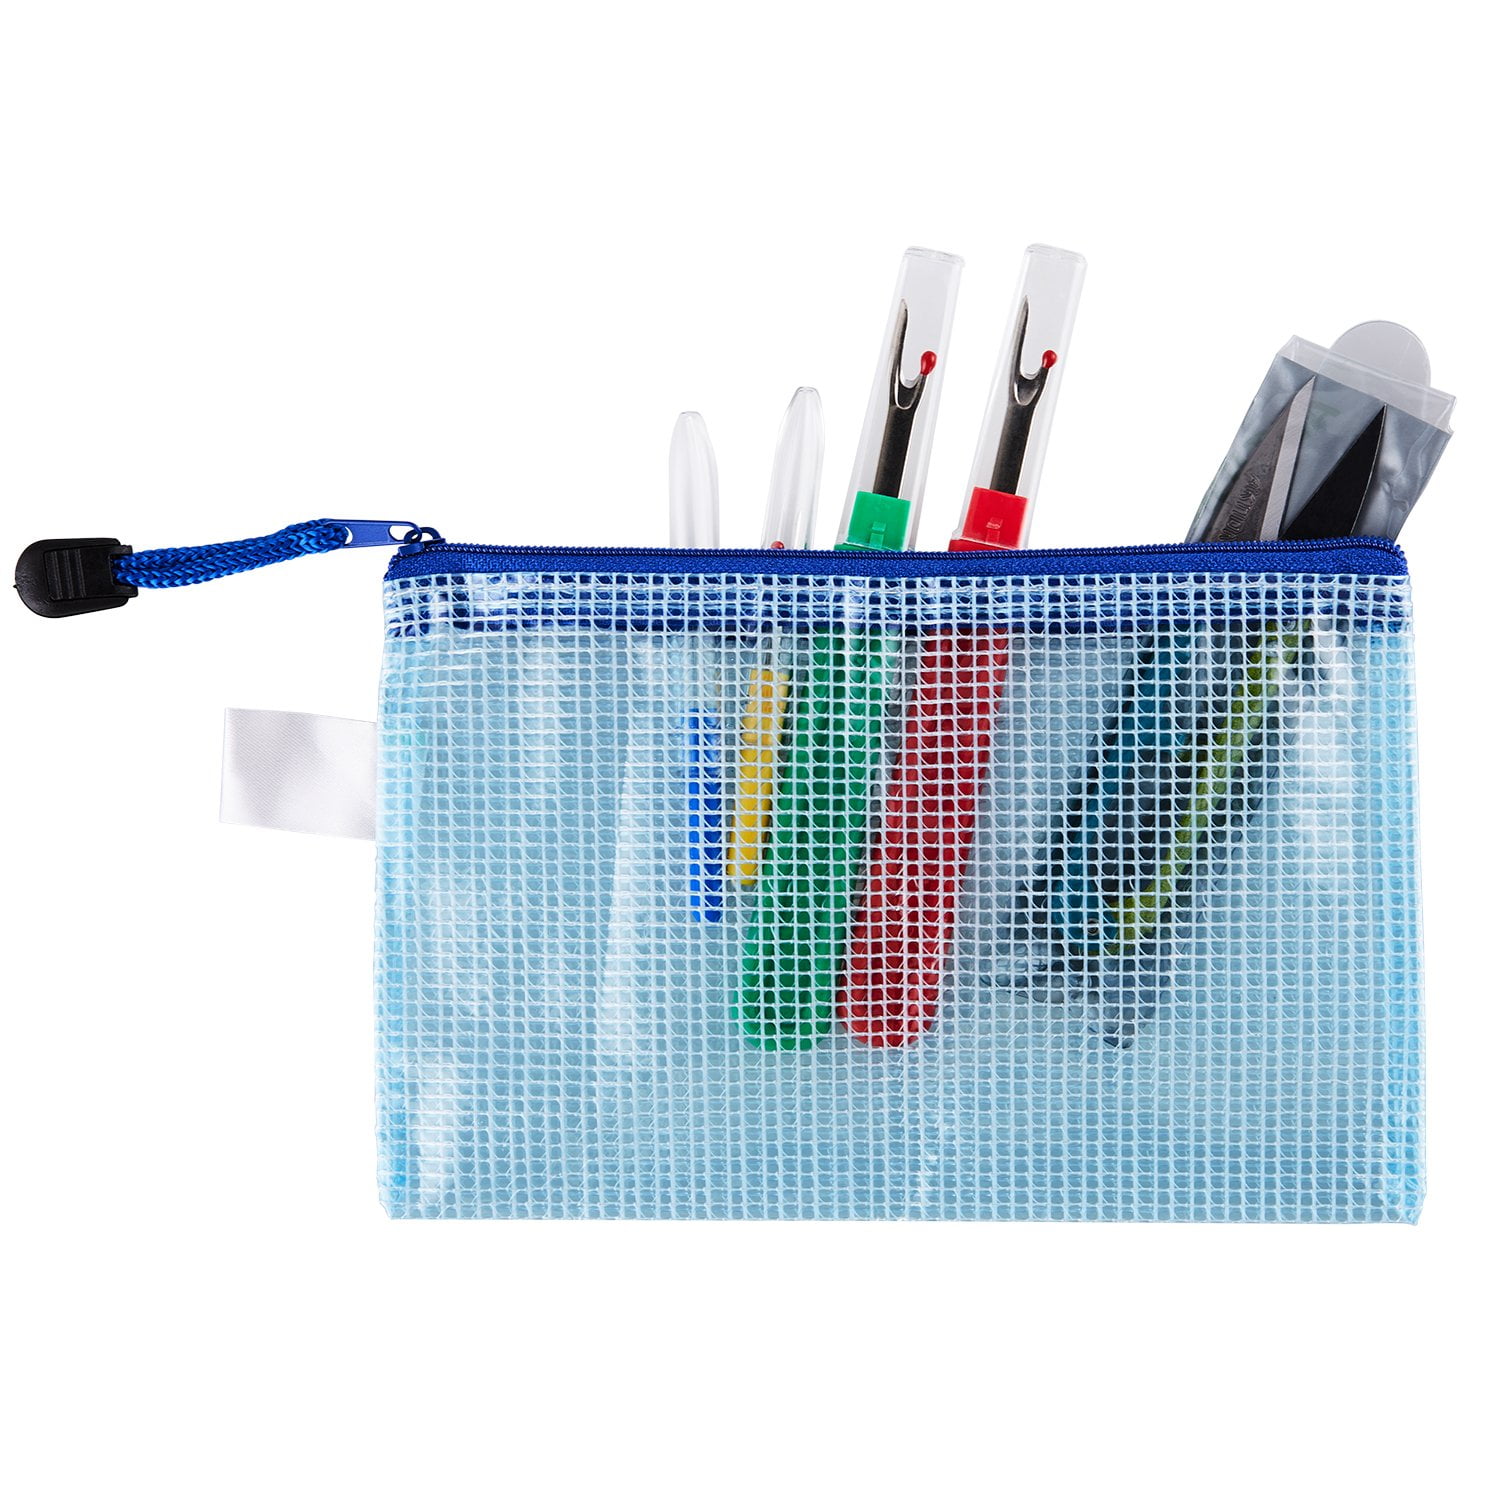 Pro grade Sewing For Seam Opener and Thread Remover Kit for Precise Results